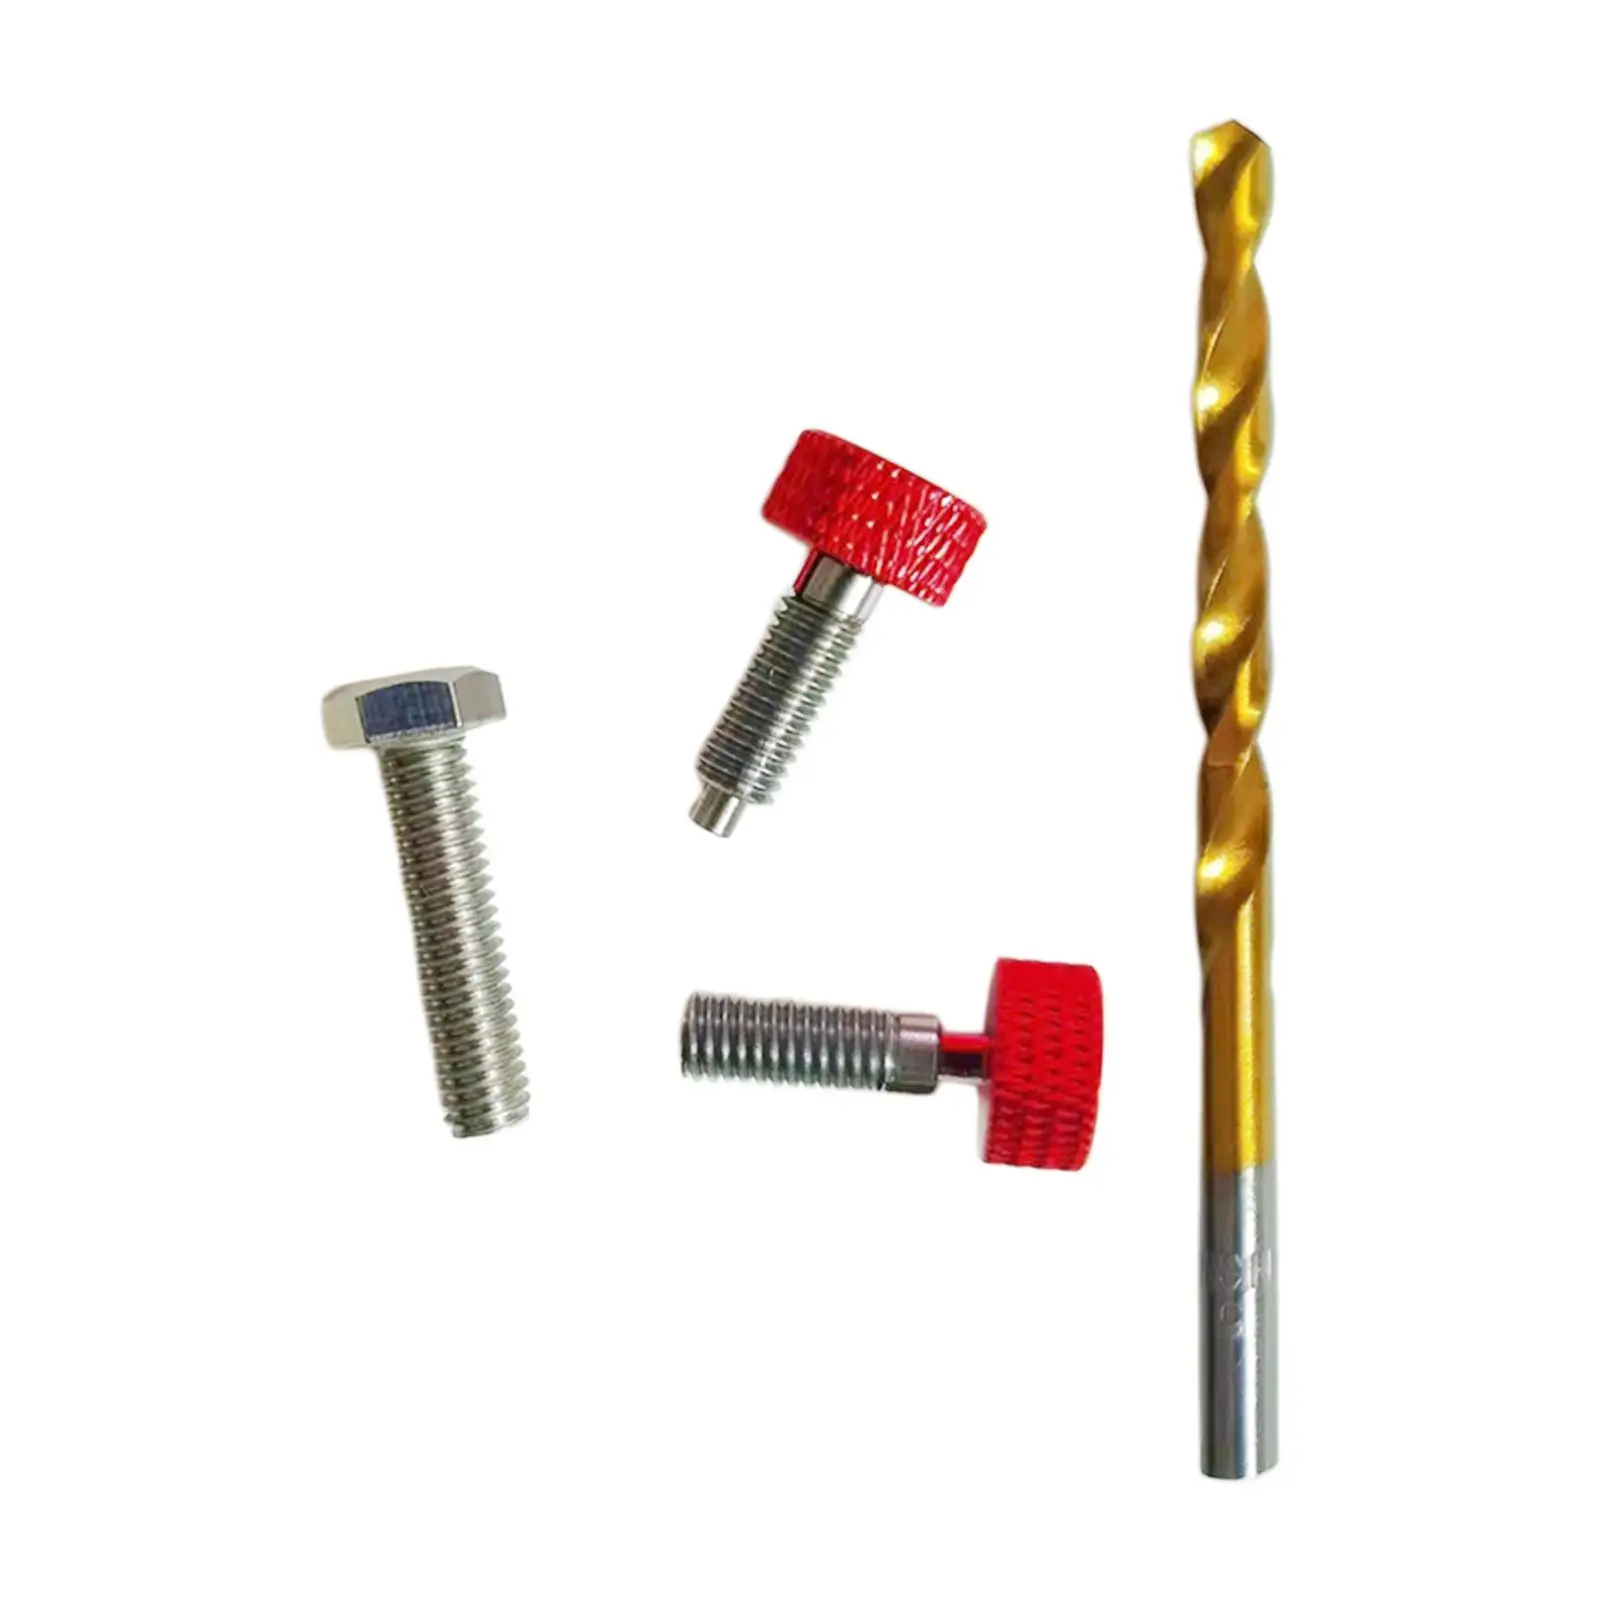 Handle Quick Release Pins, Lock Out Handle Retractable Stainless Plunger with Knurled Handle